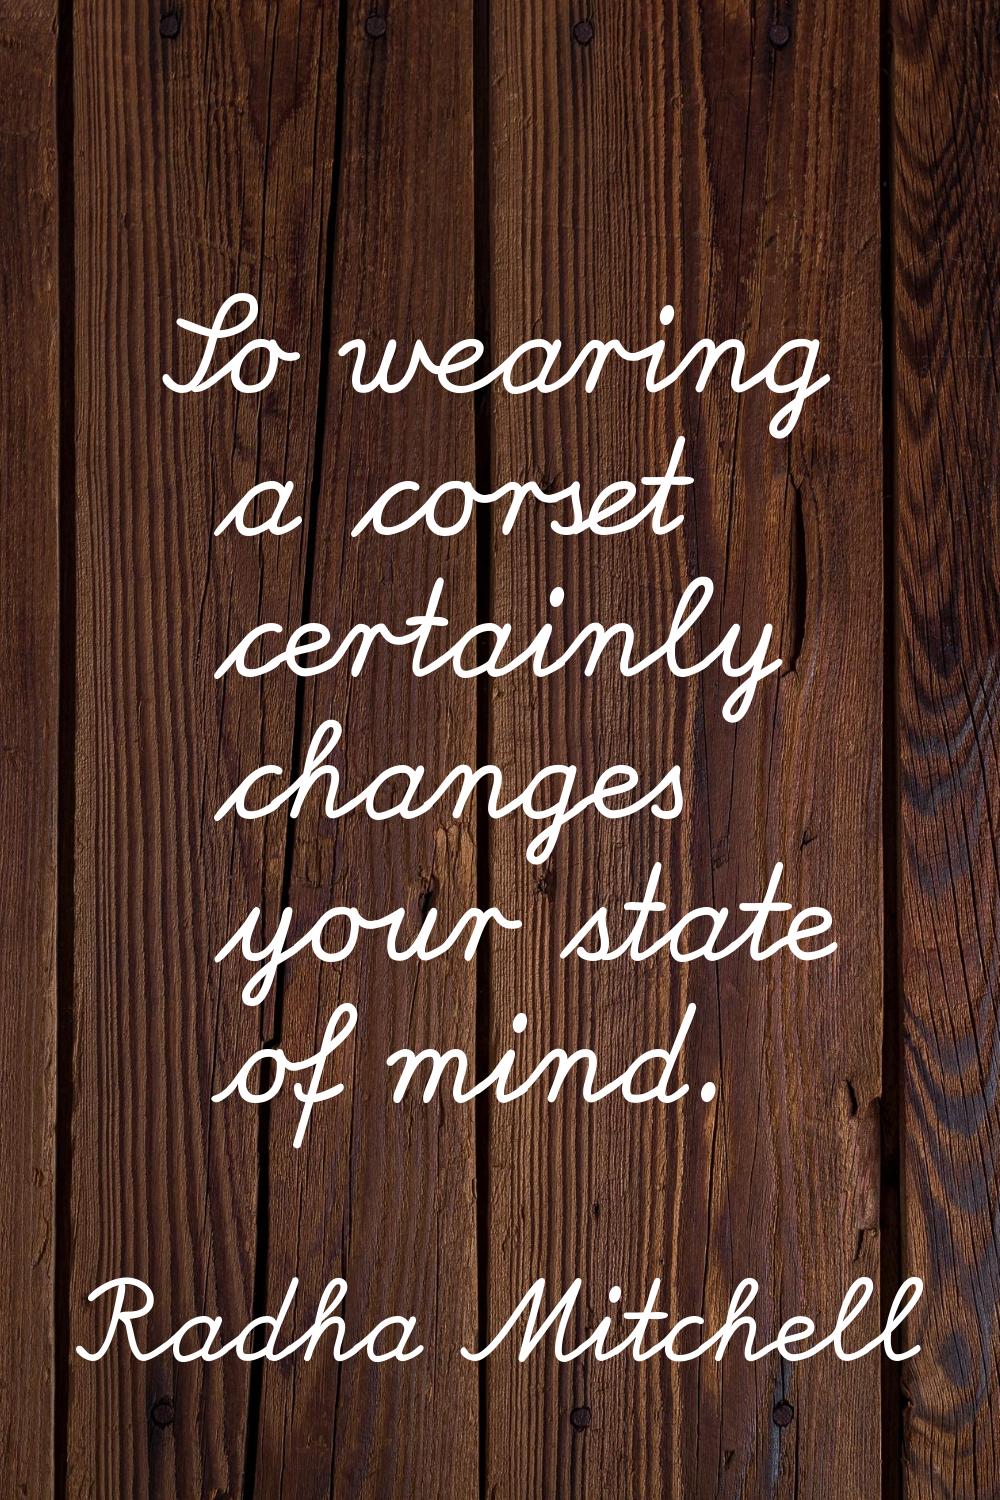 So wearing a corset certainly changes your state of mind.